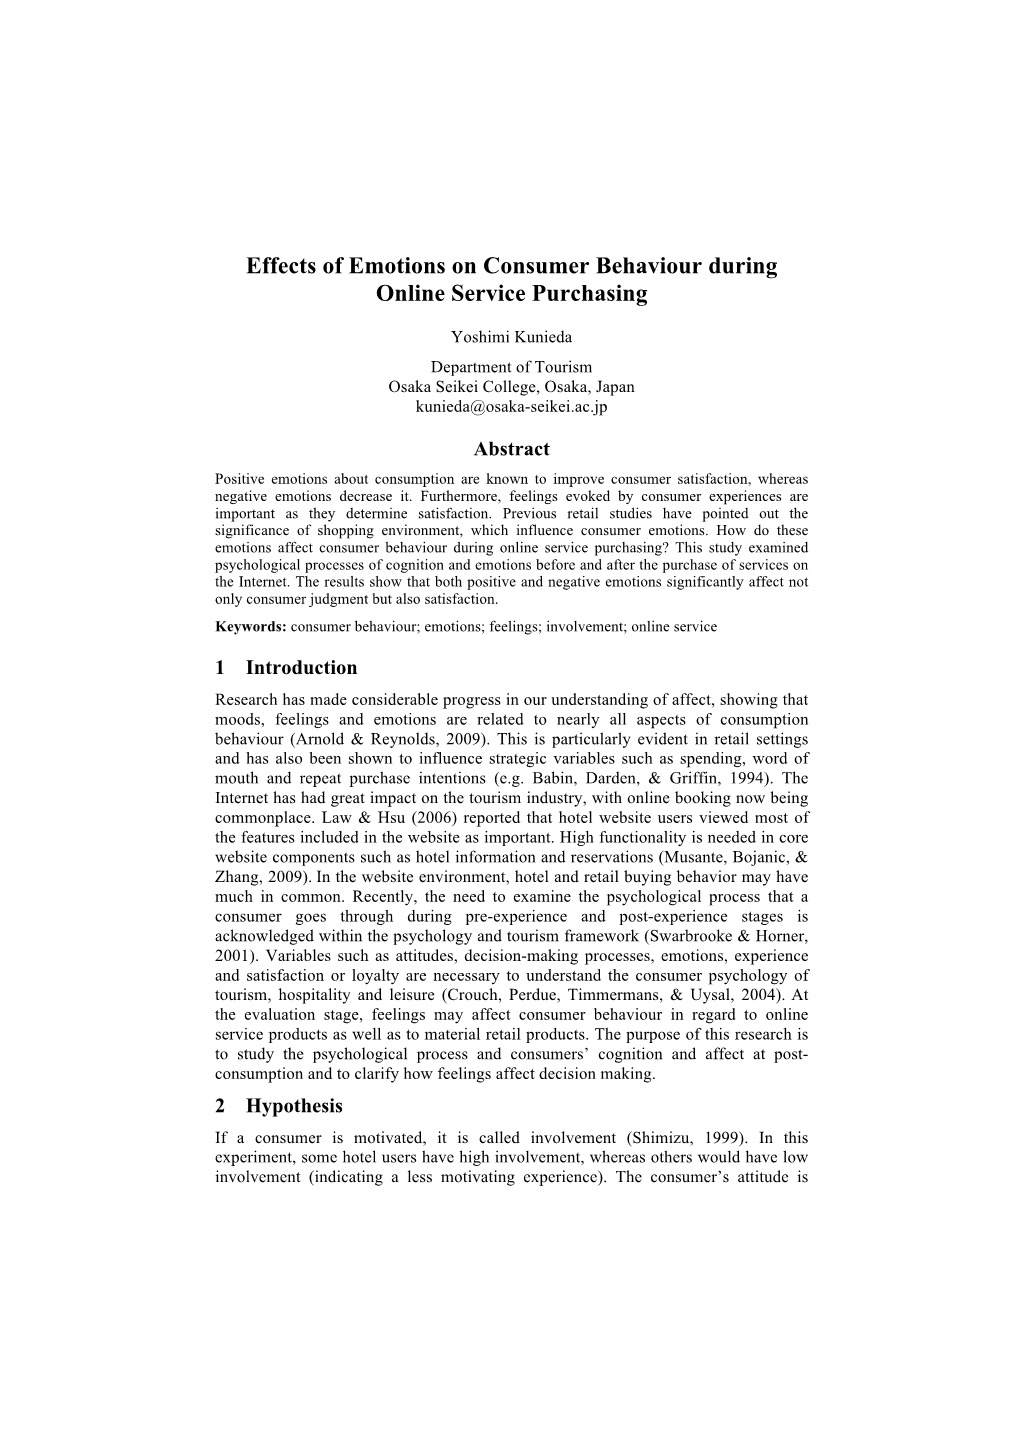 Effects of Emotions on Consumer Behaviour During Online Service Purchasing